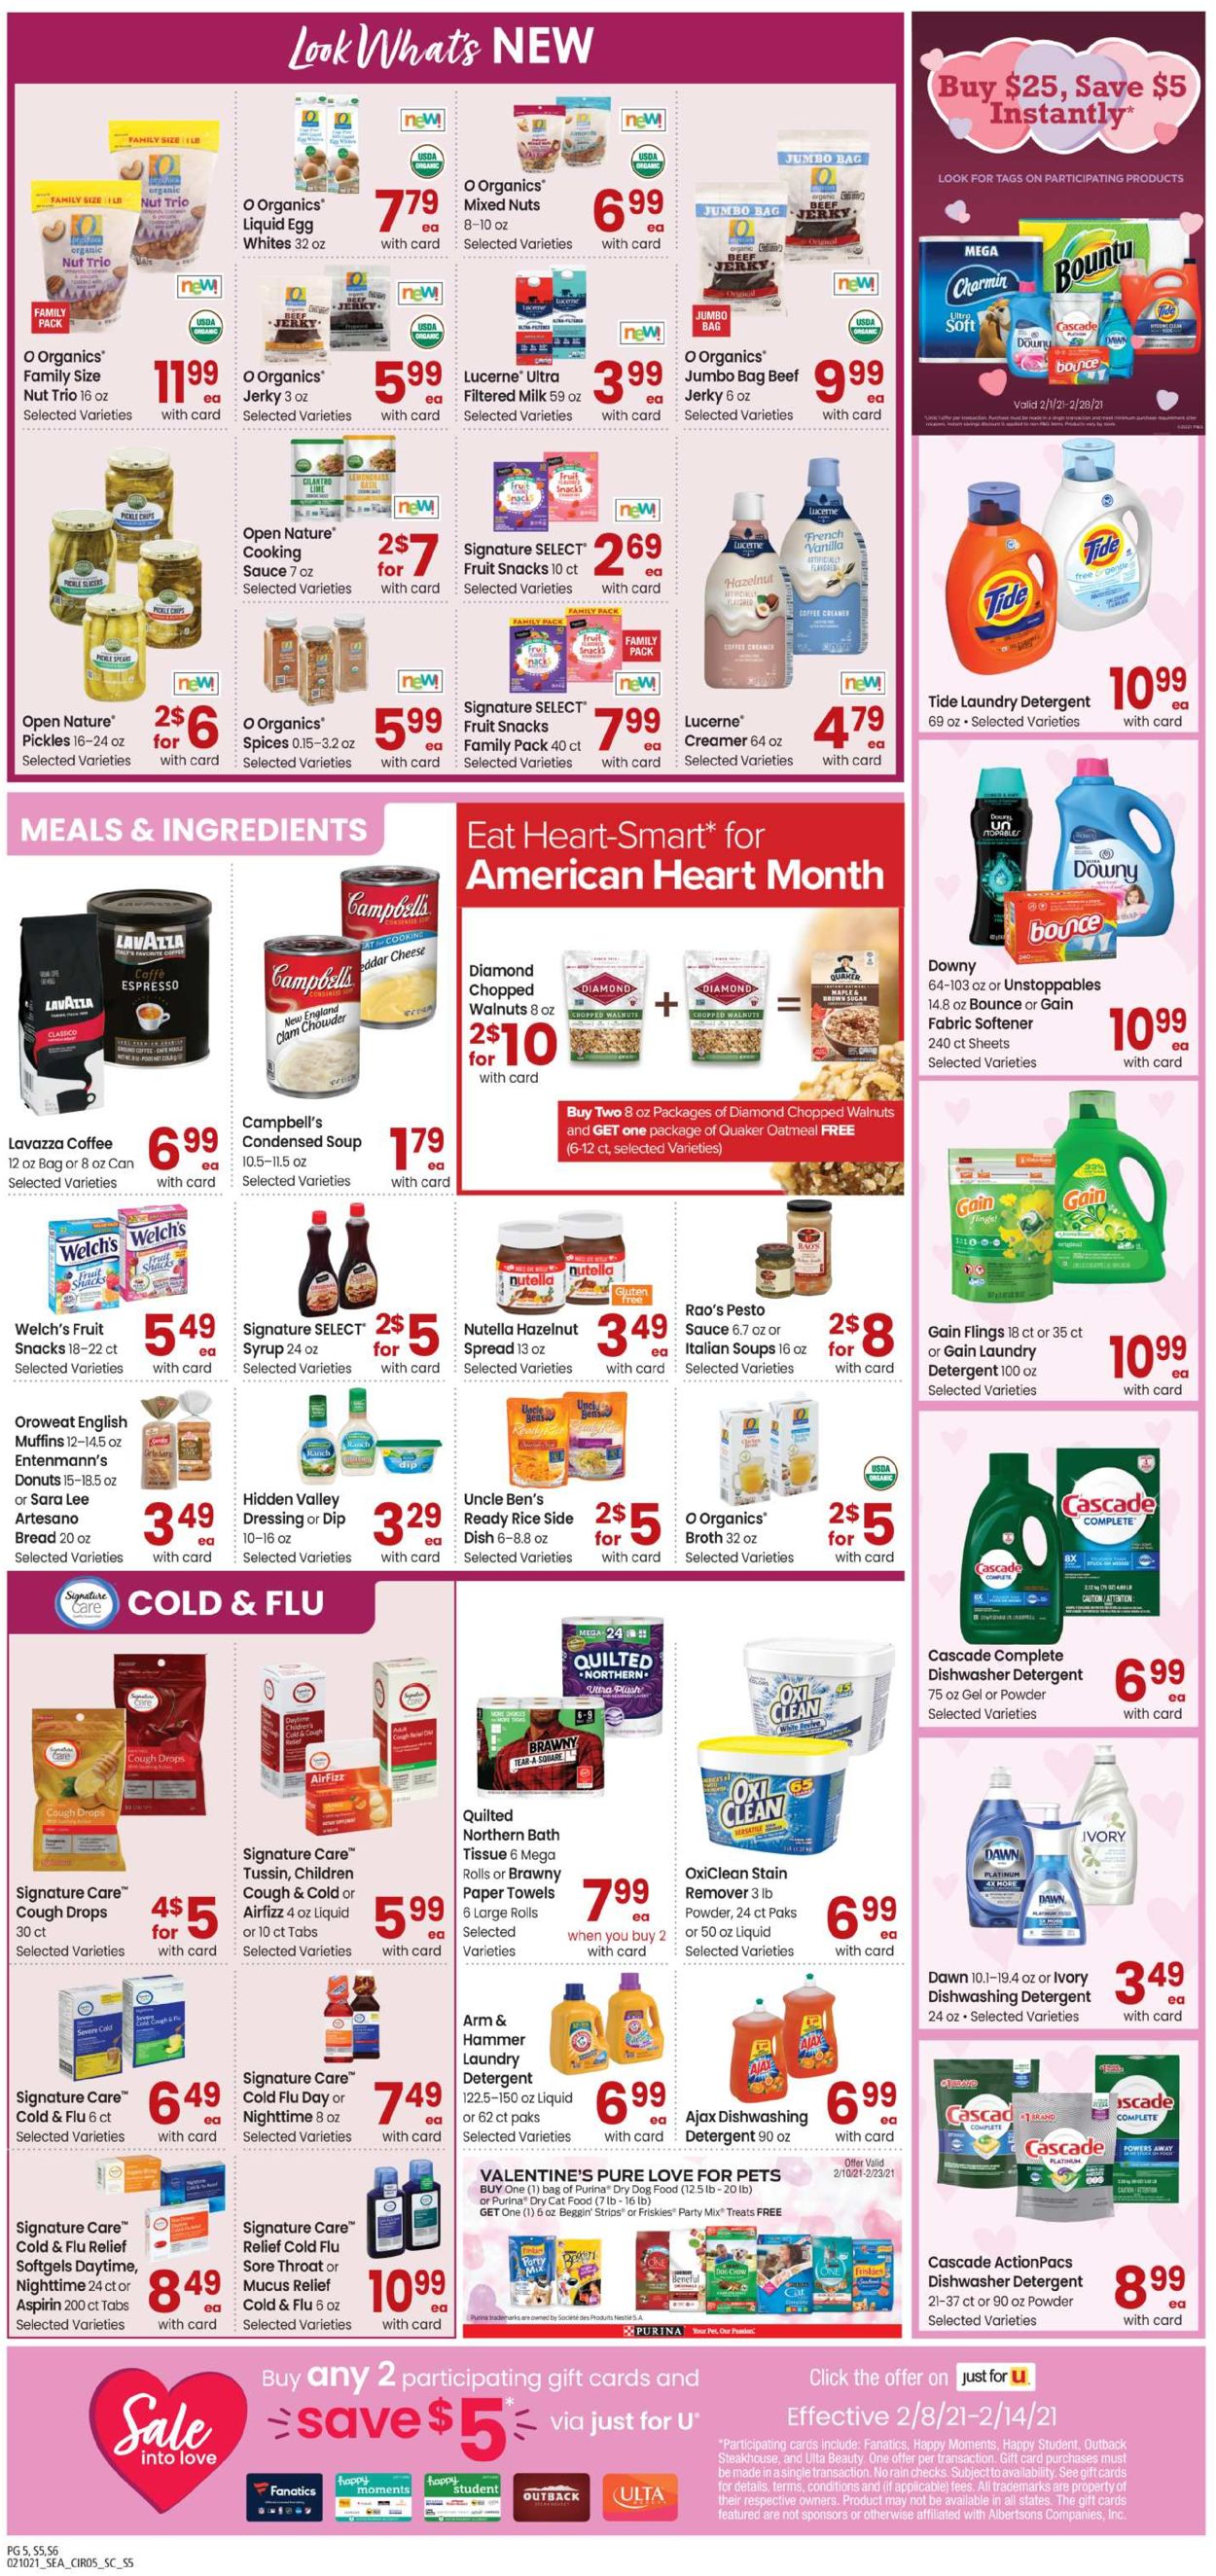 Carrs Ad from 02/10/2021